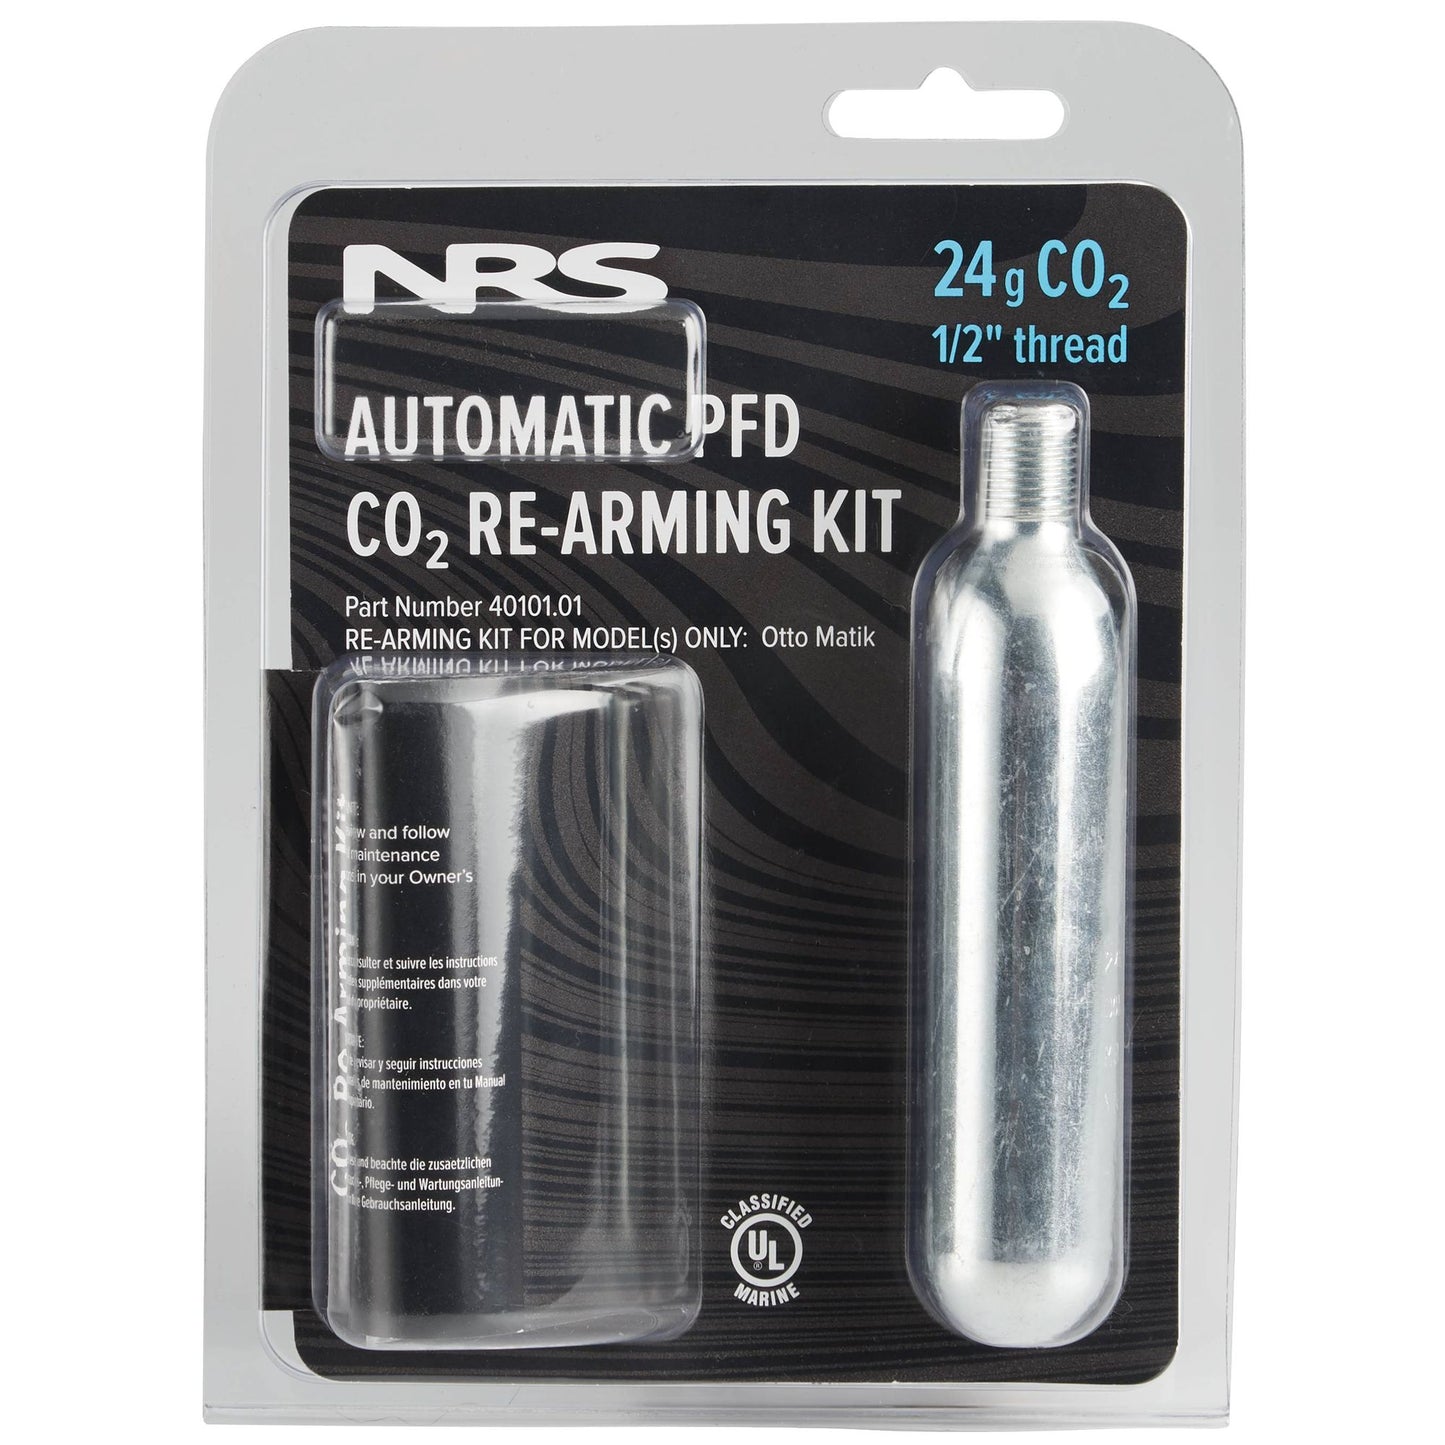 NRS Automatic PFD 24g C02 Re-Arming Kit